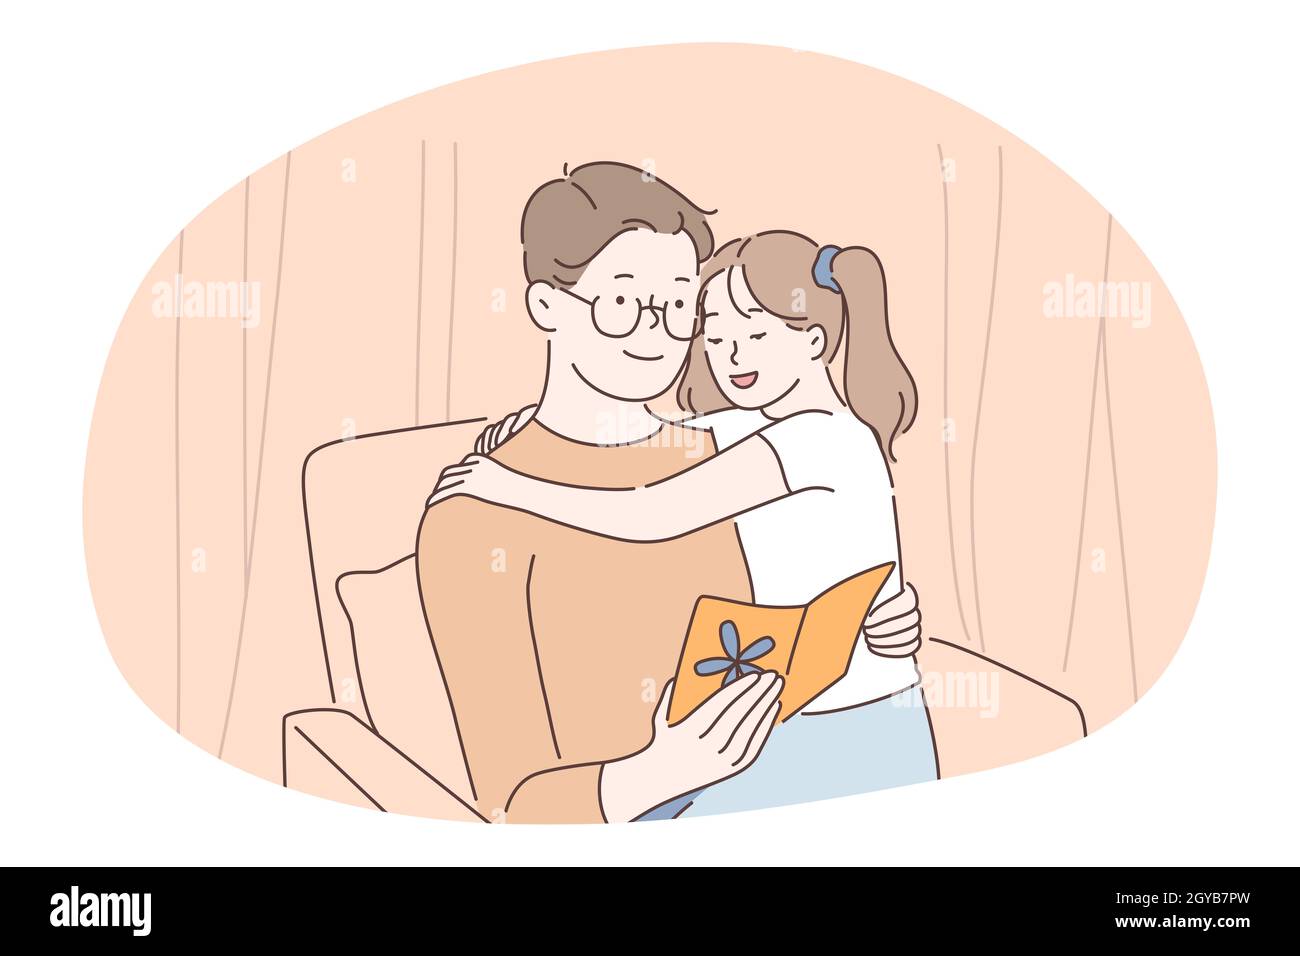 Family care, fatherhood, fathers day concept. Man father daddy coach parent sitting with daughter on knees and reading book together at home. Fathers Stock Photo